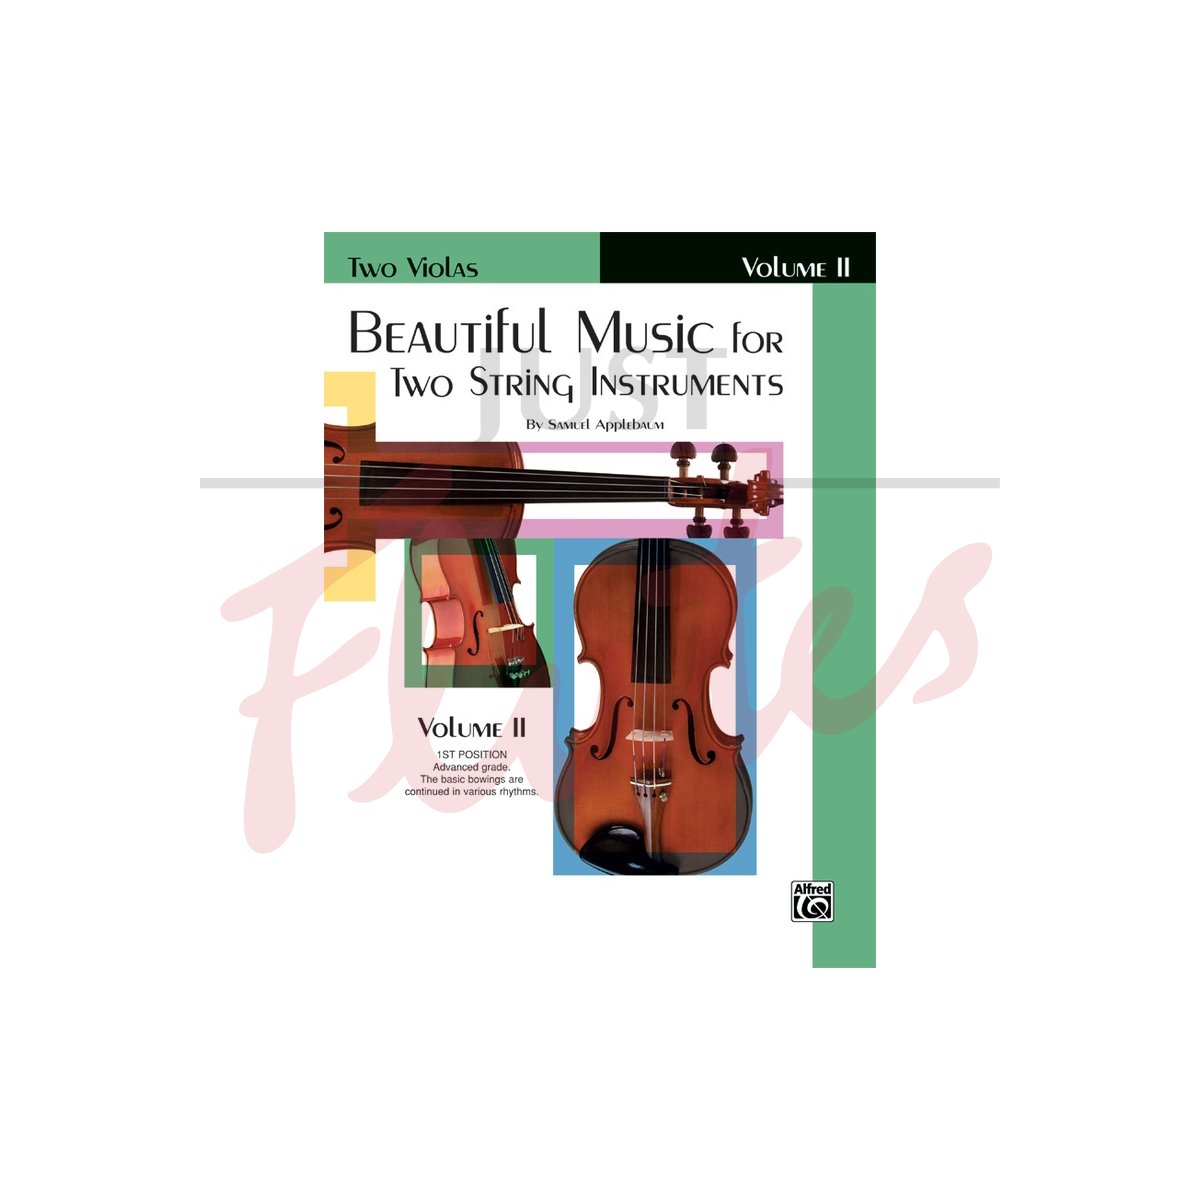 Beautiful Music for Two String Instruments Vol 2 [Viola]